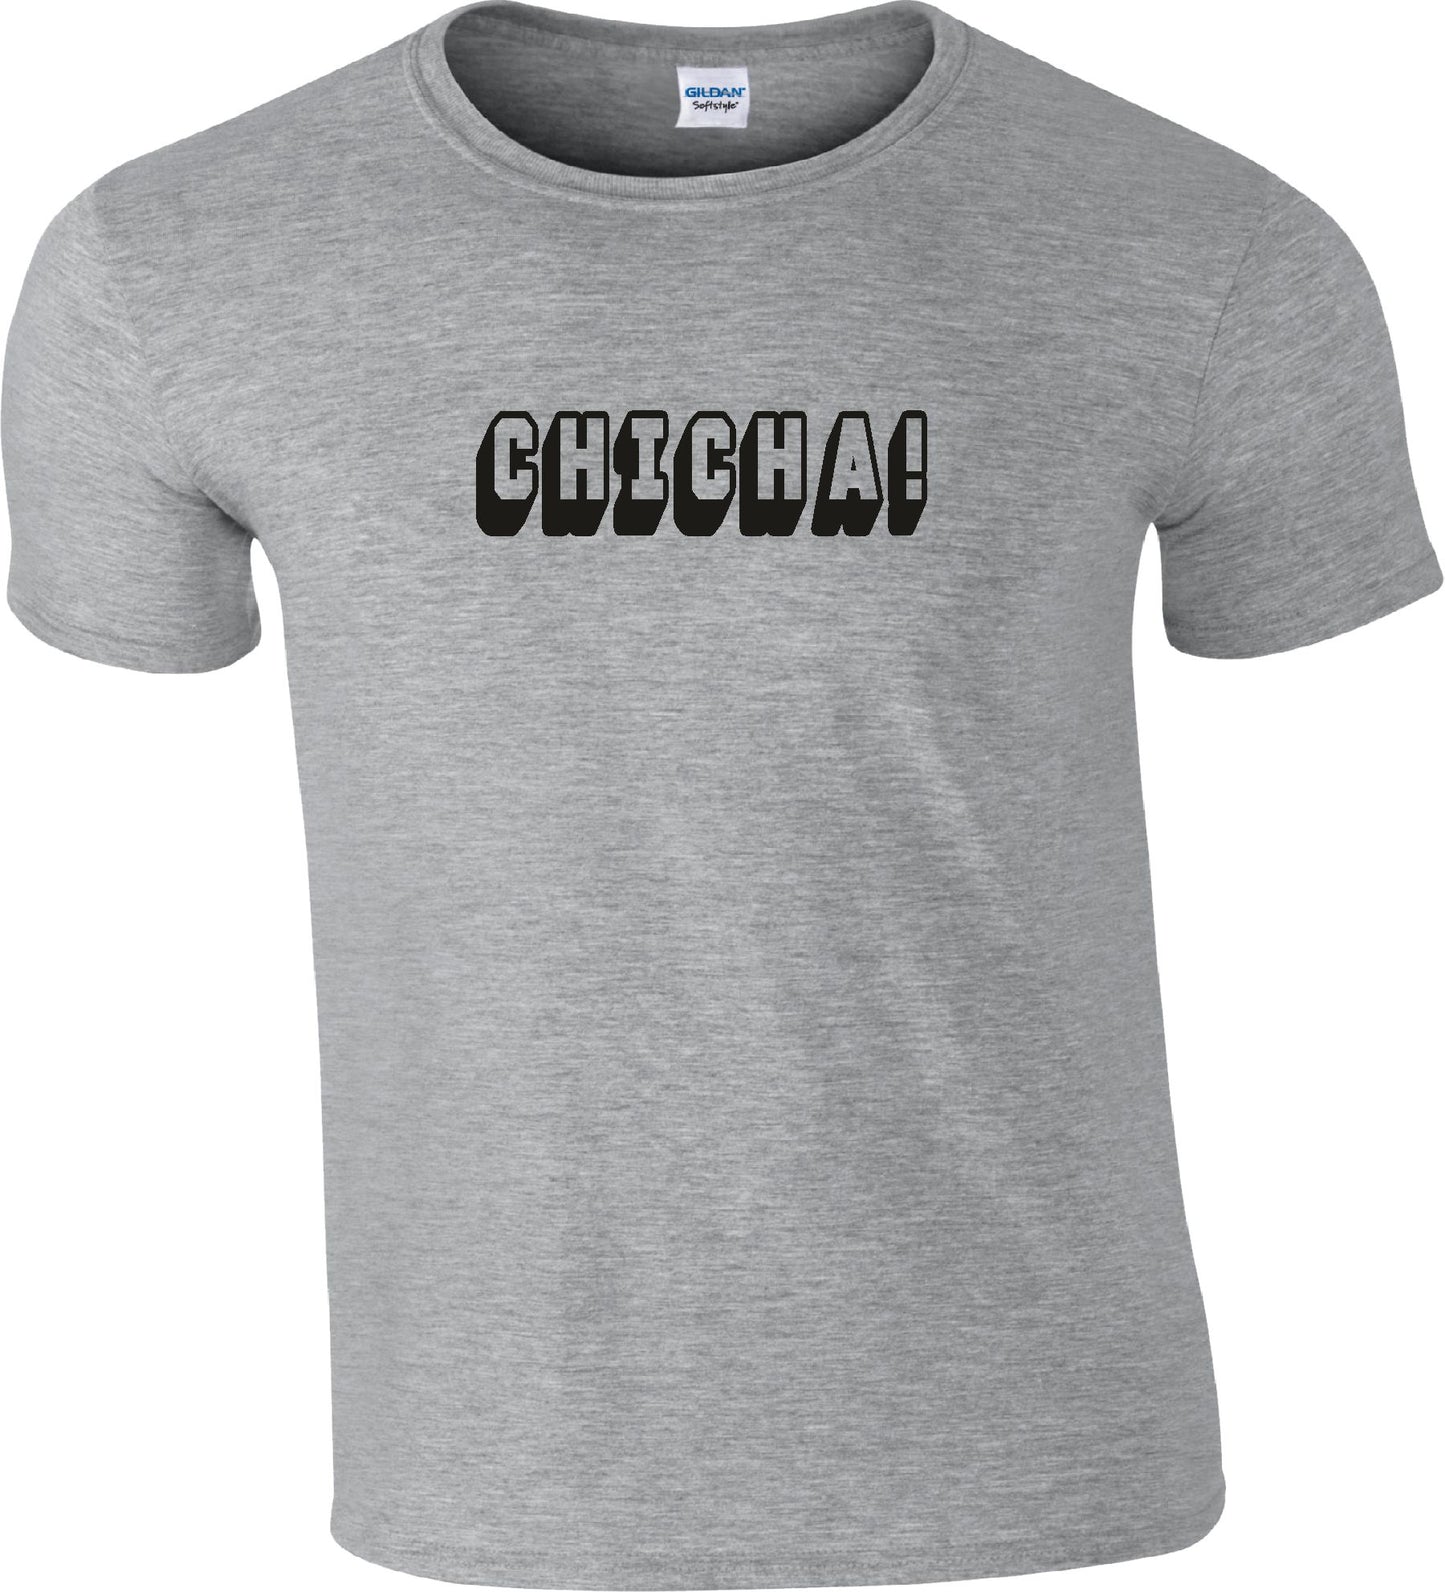 Chicha T-Shirt - Peruvian Cumbia , Andean, South American, Various Colours